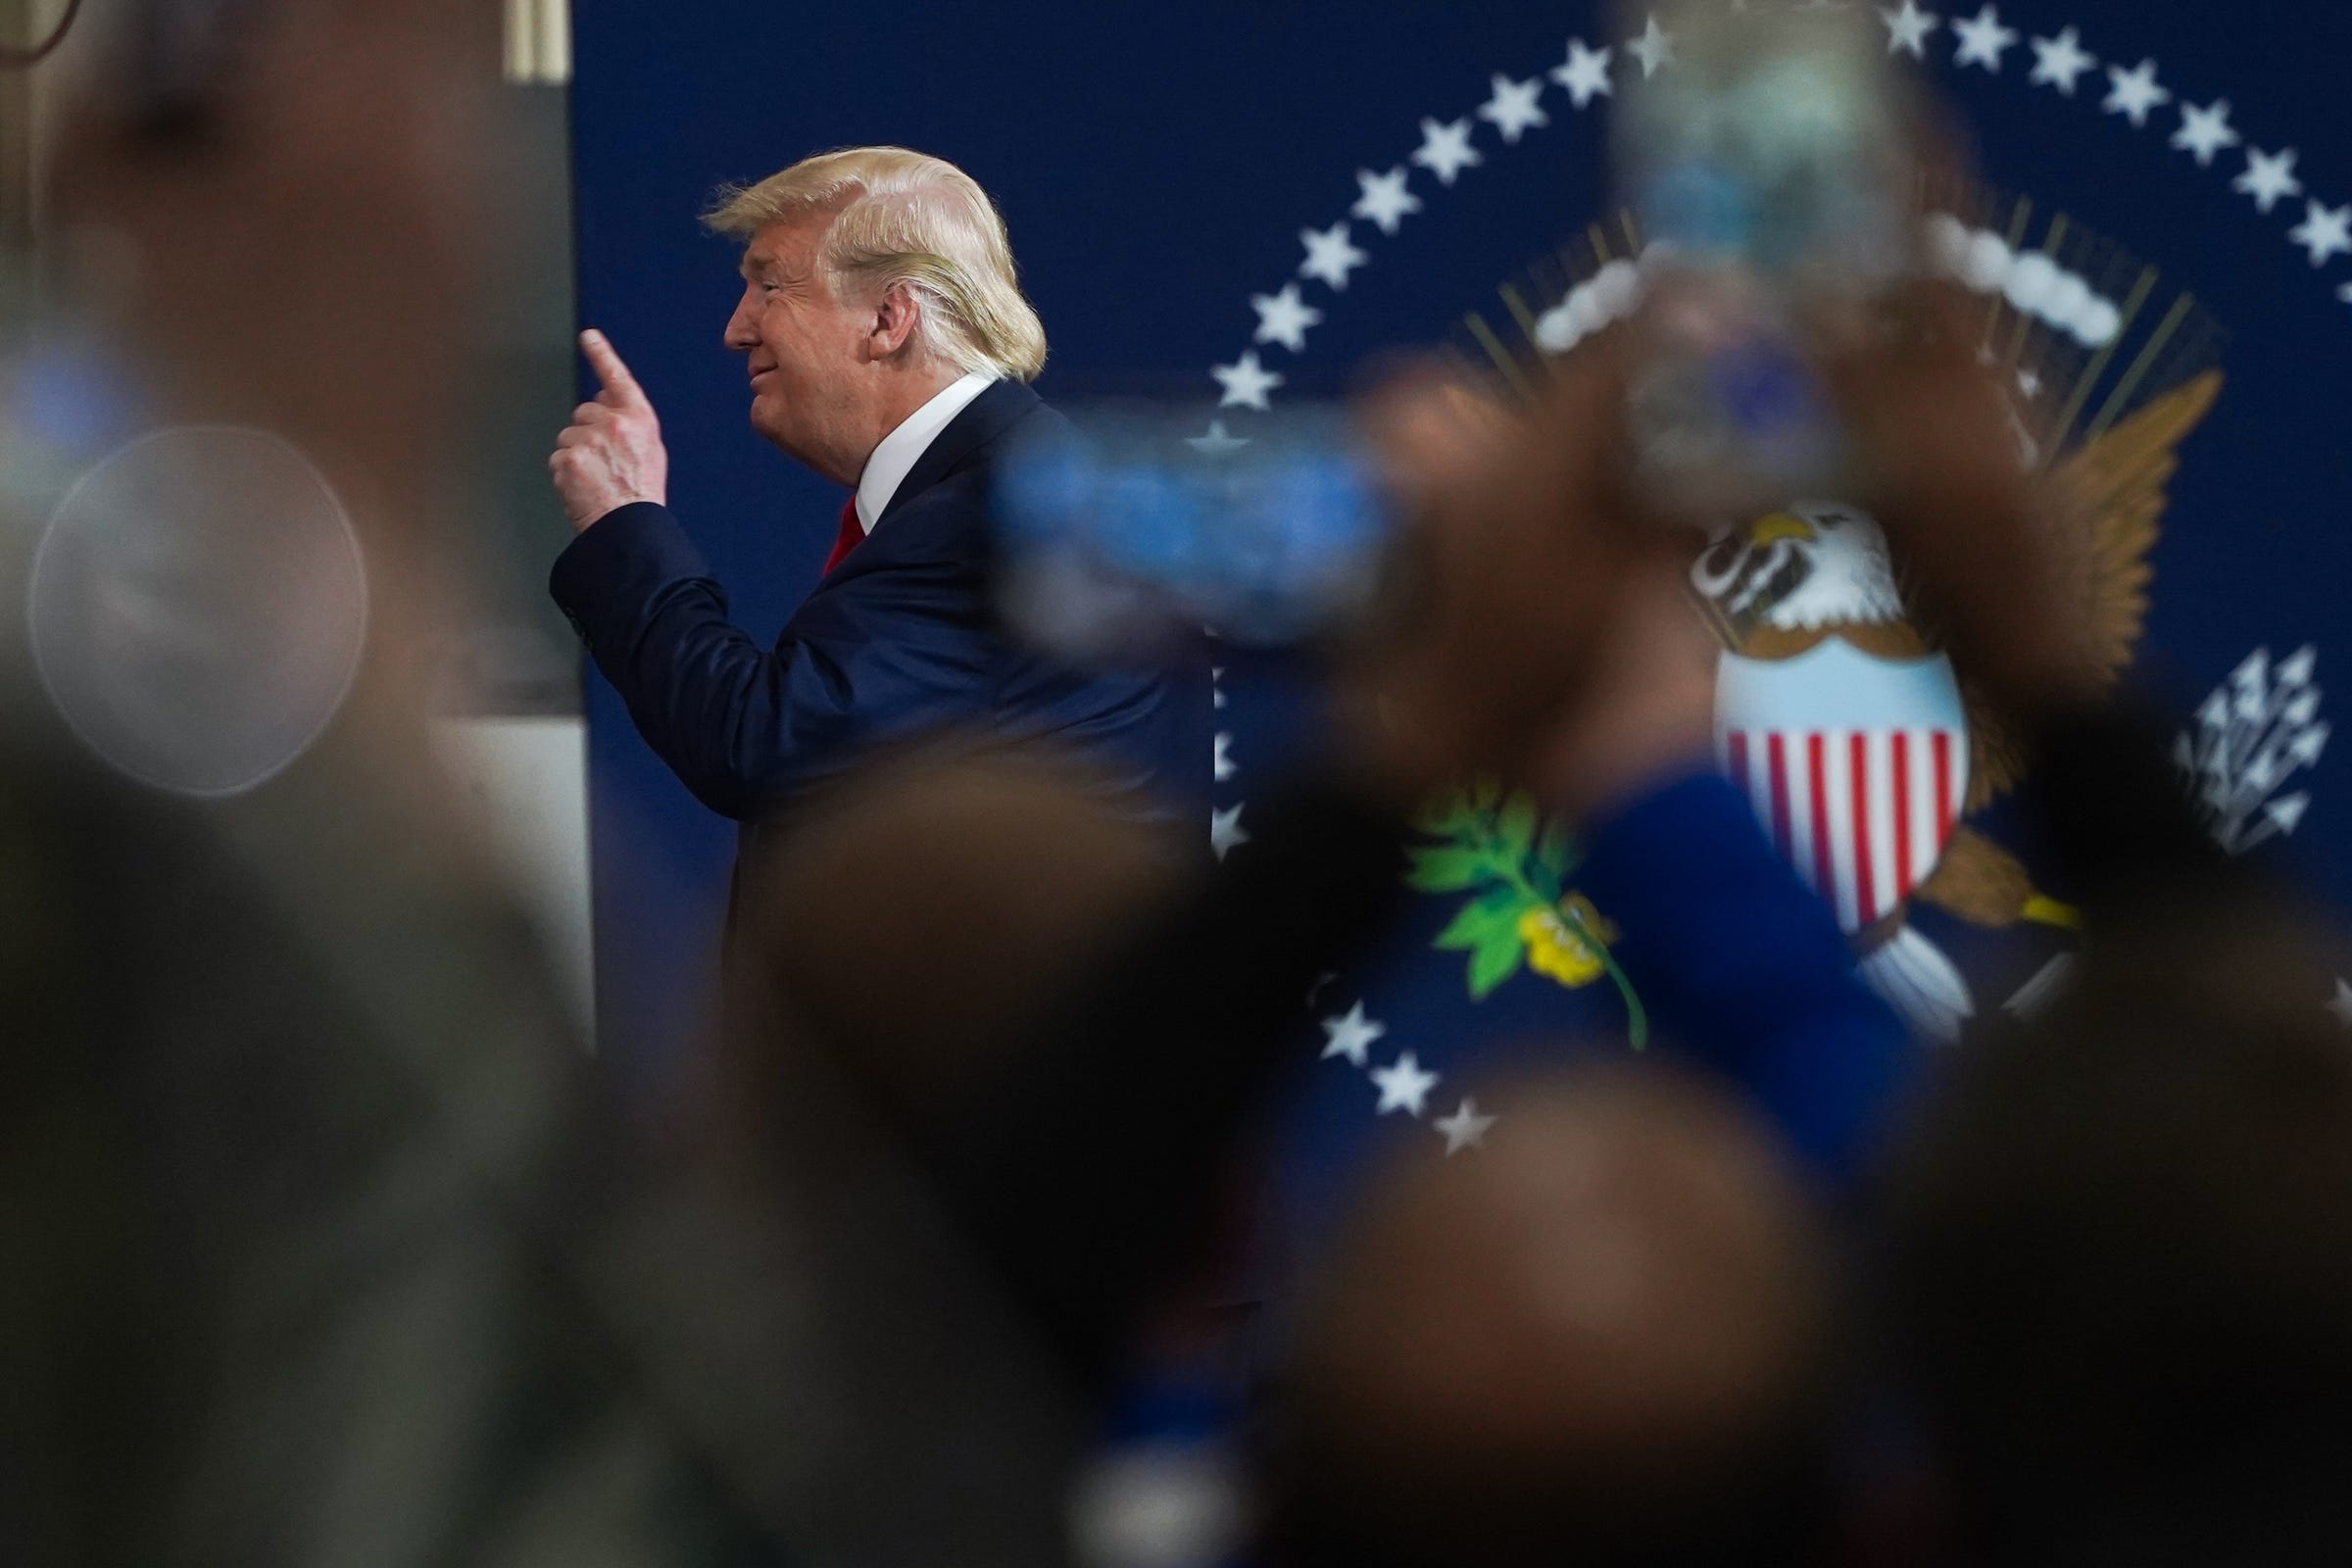 After signing a revised U.S. Mexico Canada Trade Agreement, President Donald Trump speaks to a crowd at Dana Incorporated in Warren as the 2020 Election campaigning picks up steam.